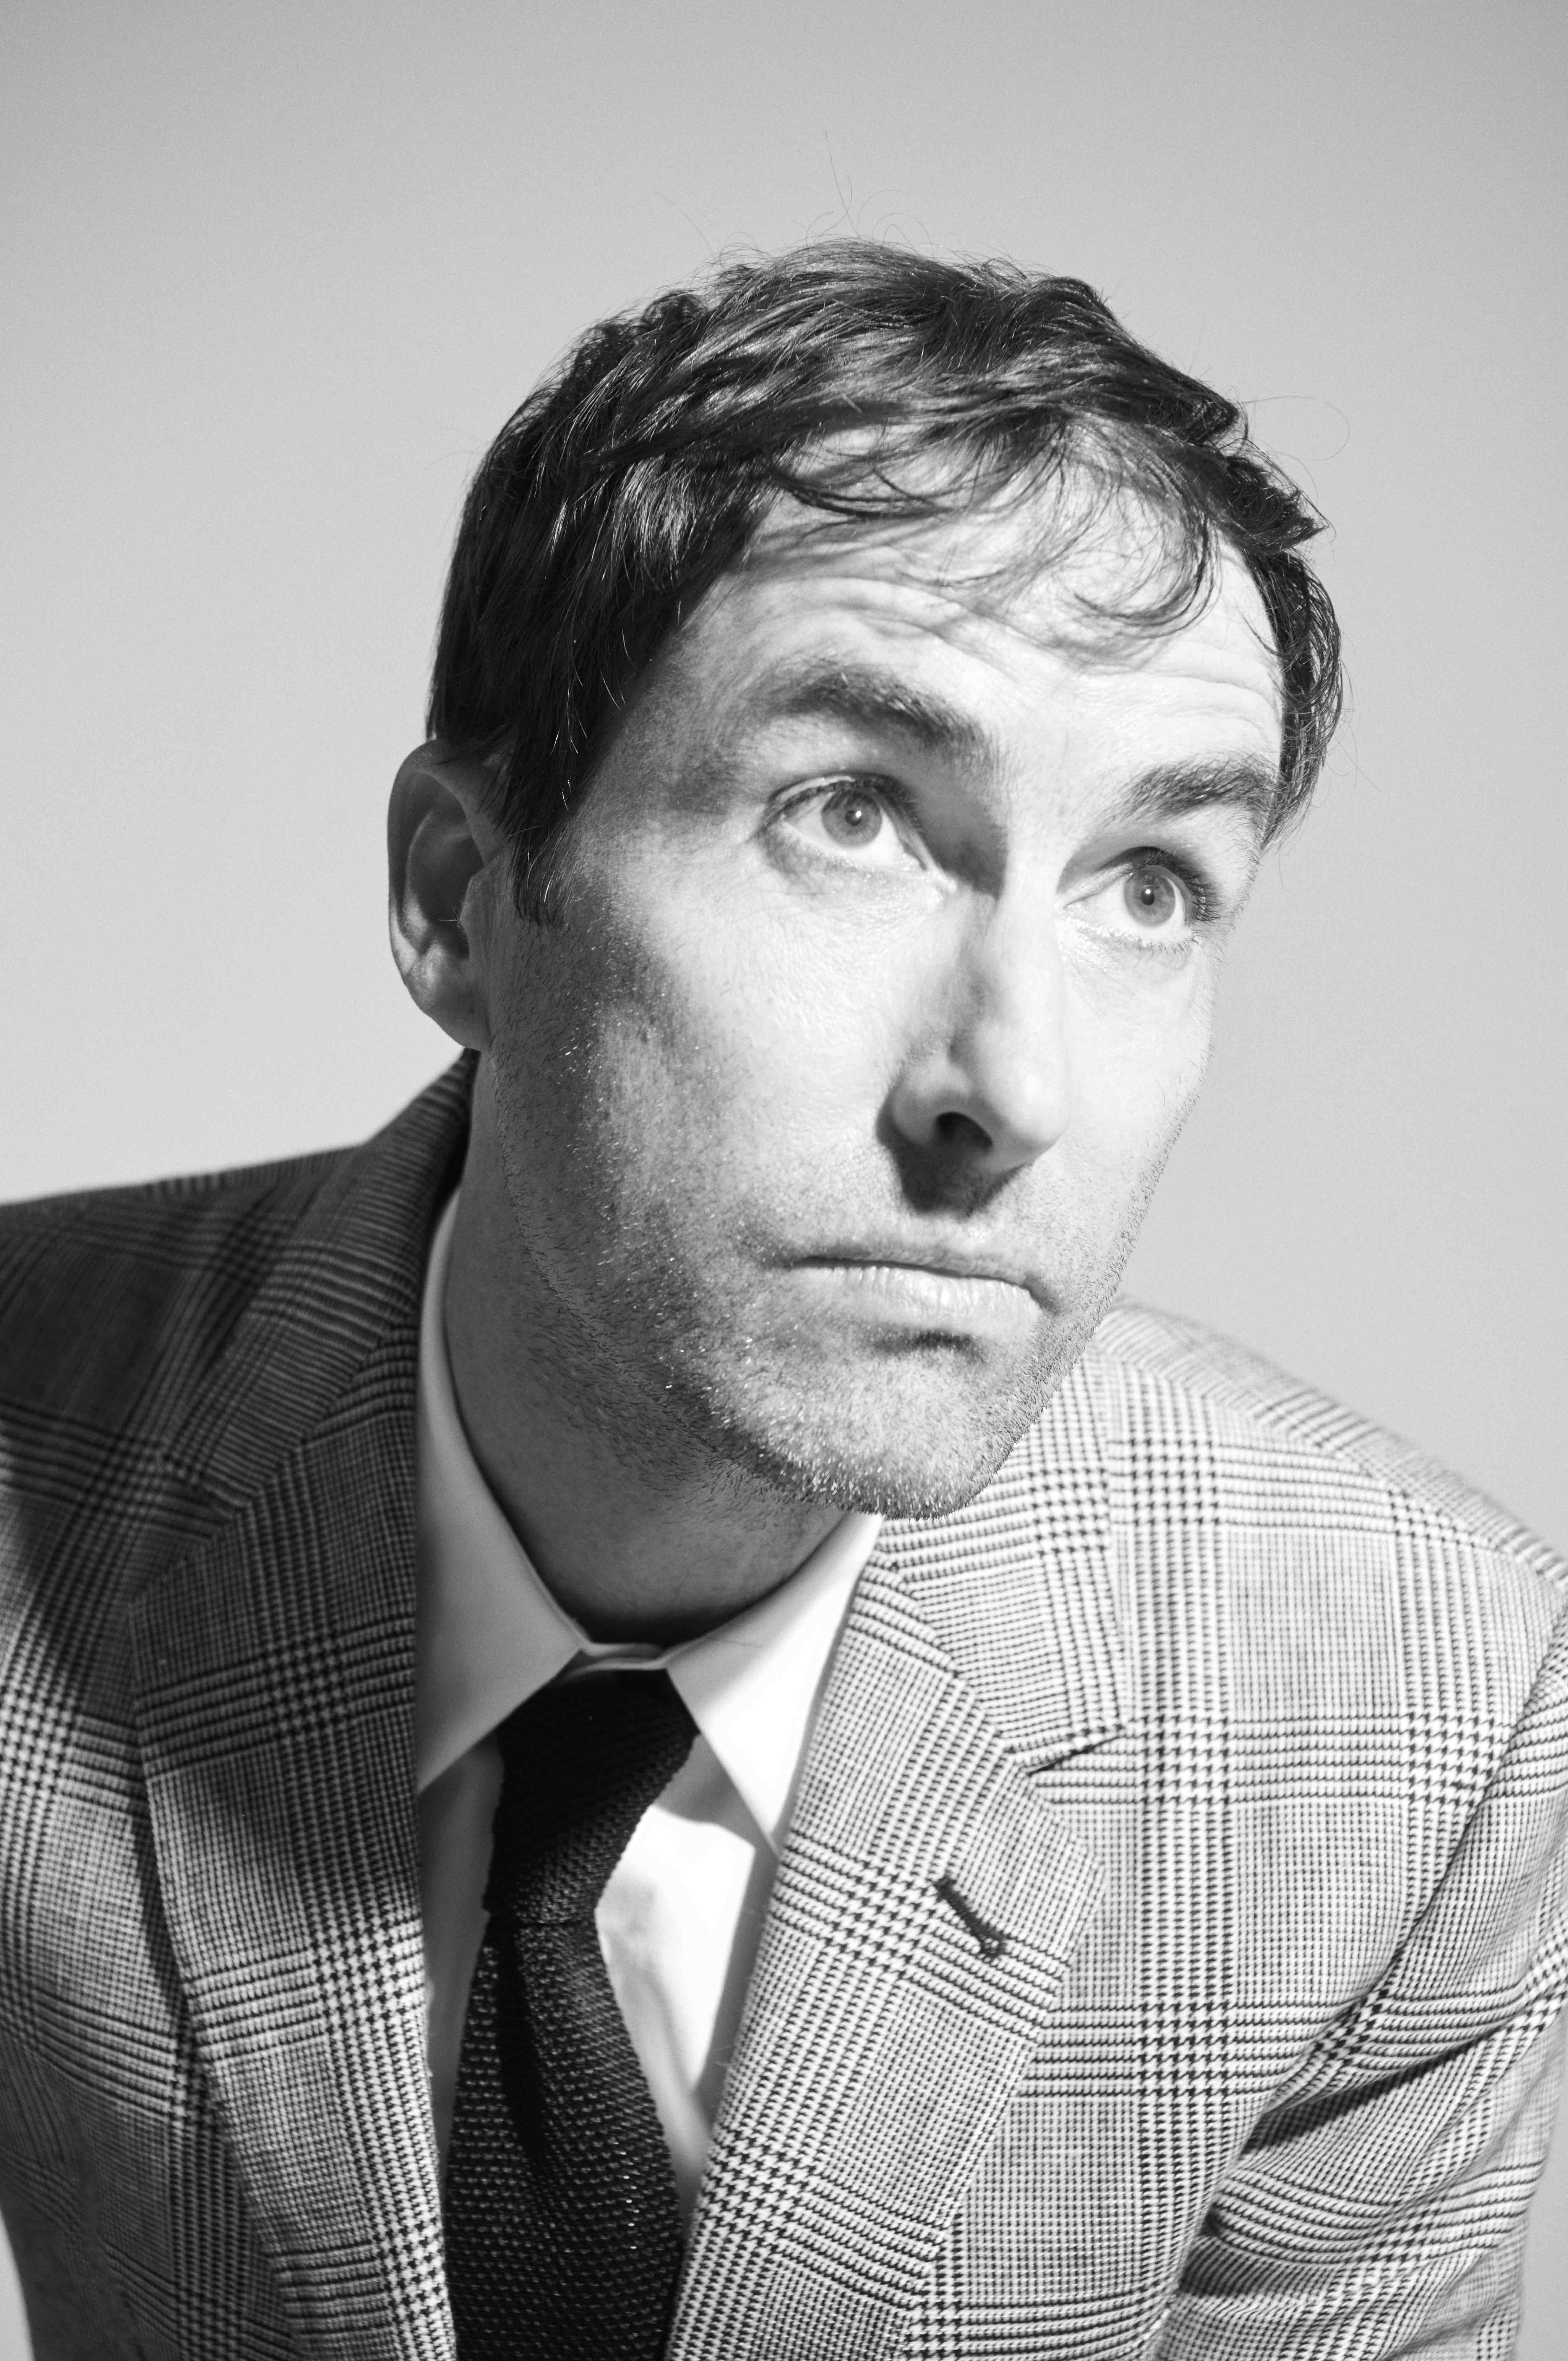 Andrew Bird Shares First Song of 2022 “Atomized”